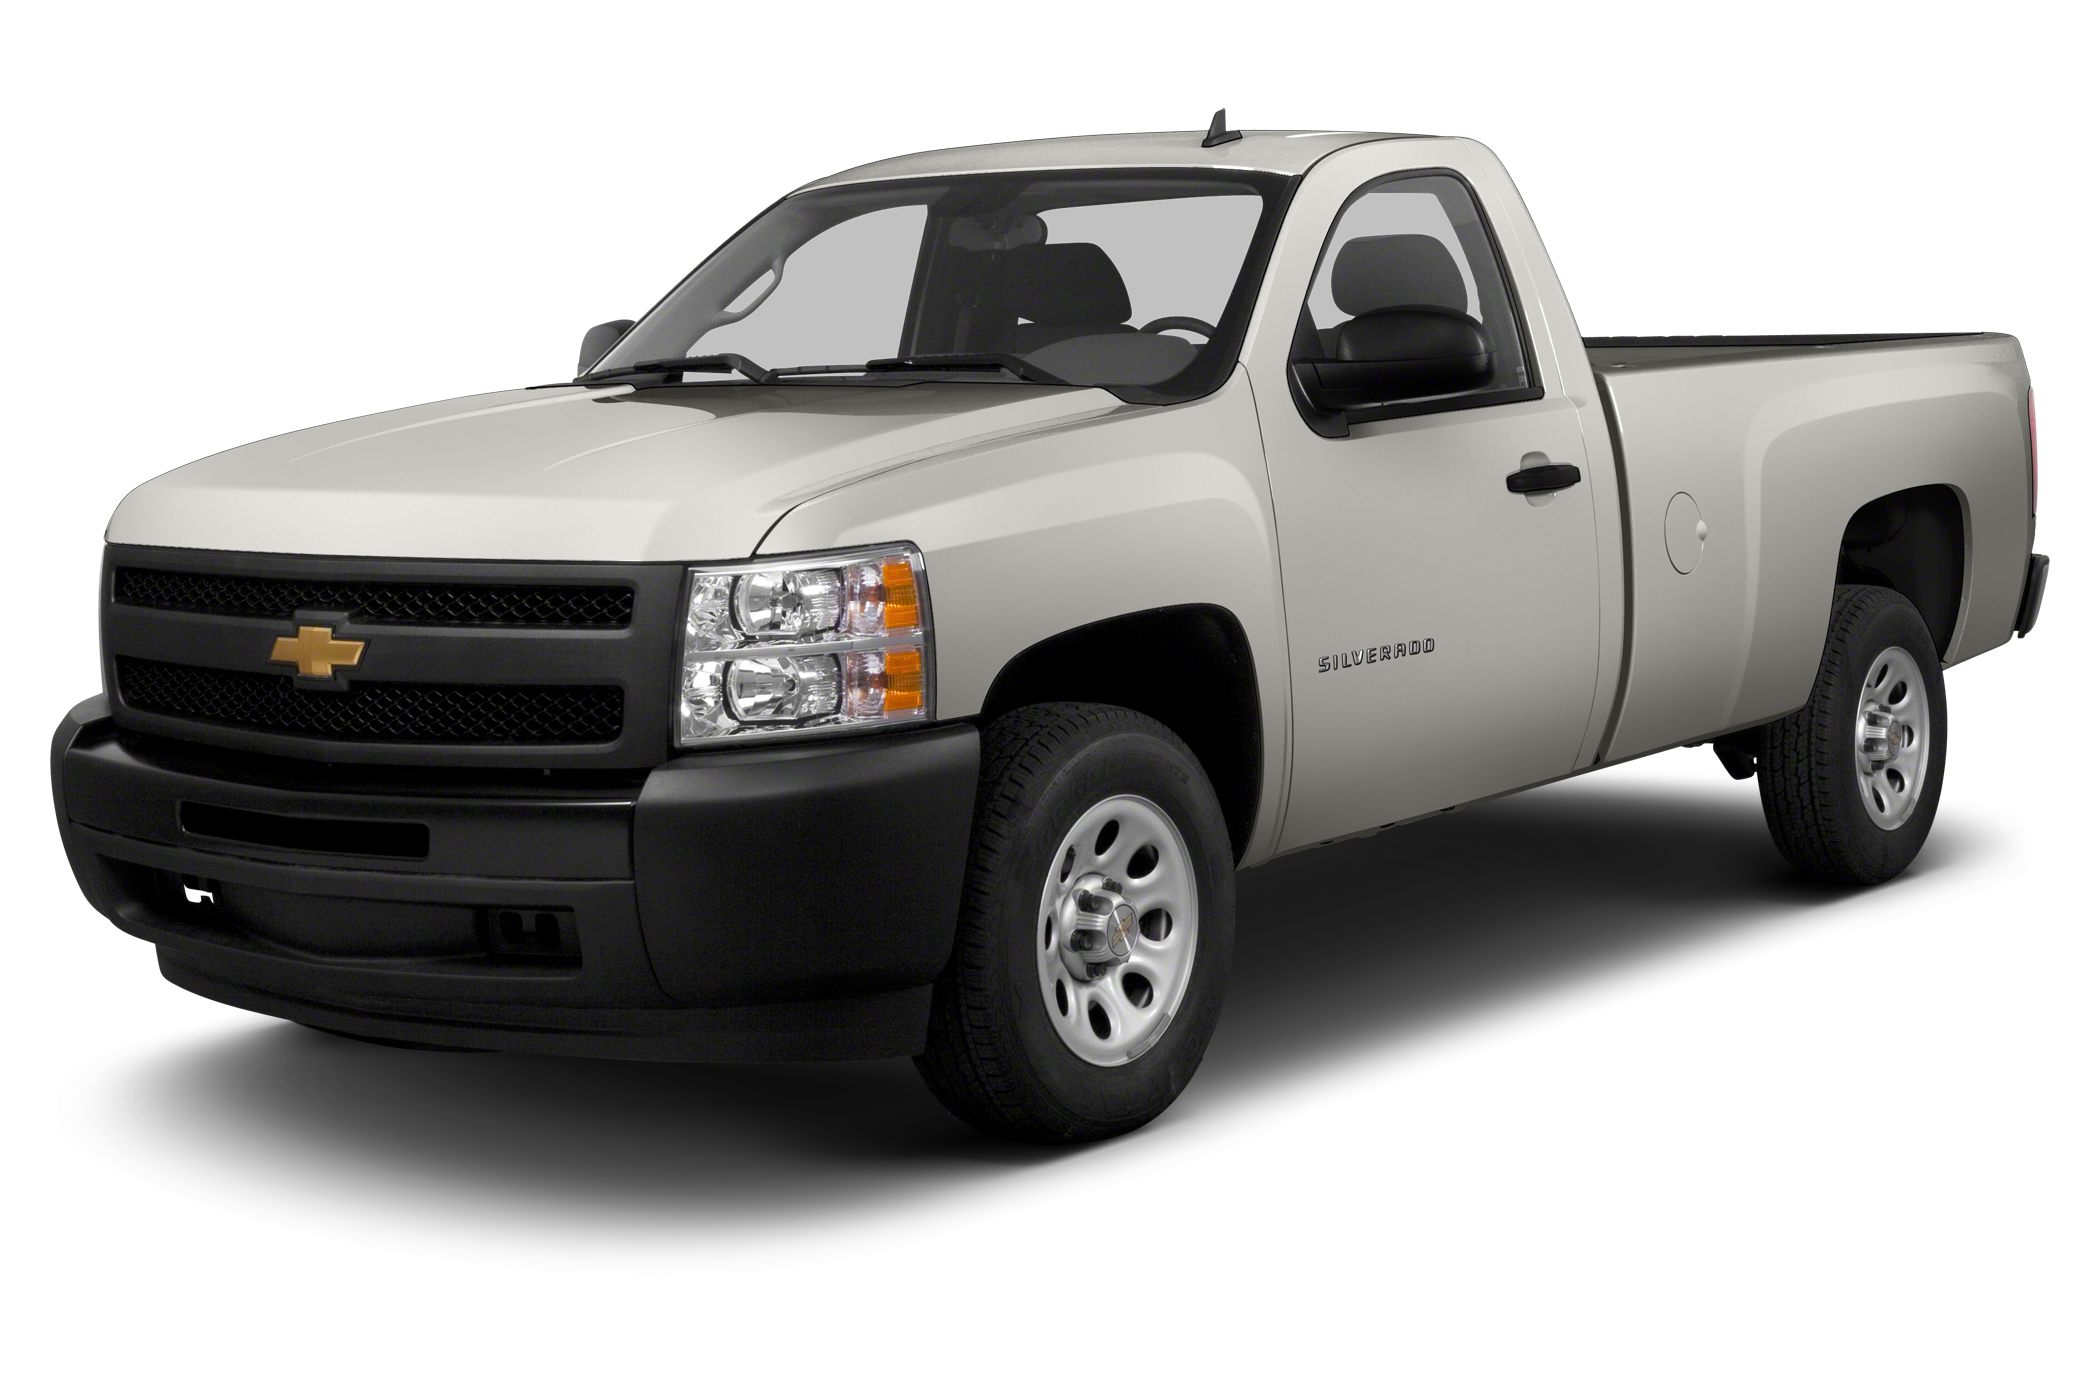 2013 Chevrolet Silverado 1500 Work Truck 4x4 Regular Cab 6 6 Ft Box 119 In Wb Pictures